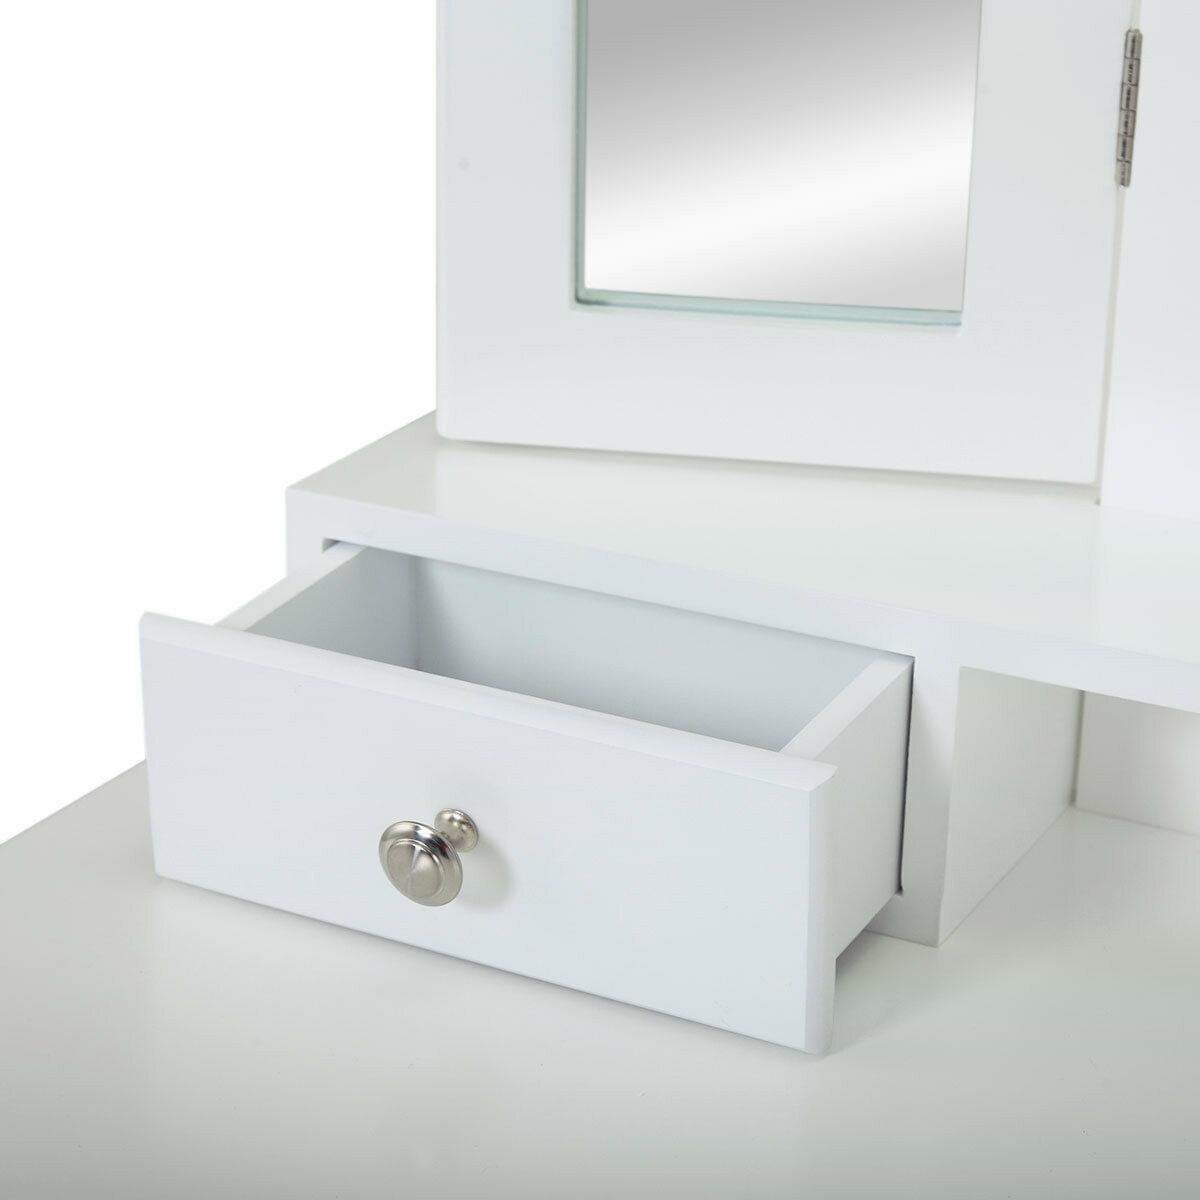 🔥BRAND NEW White Vanity Set with Foldable Mirrors